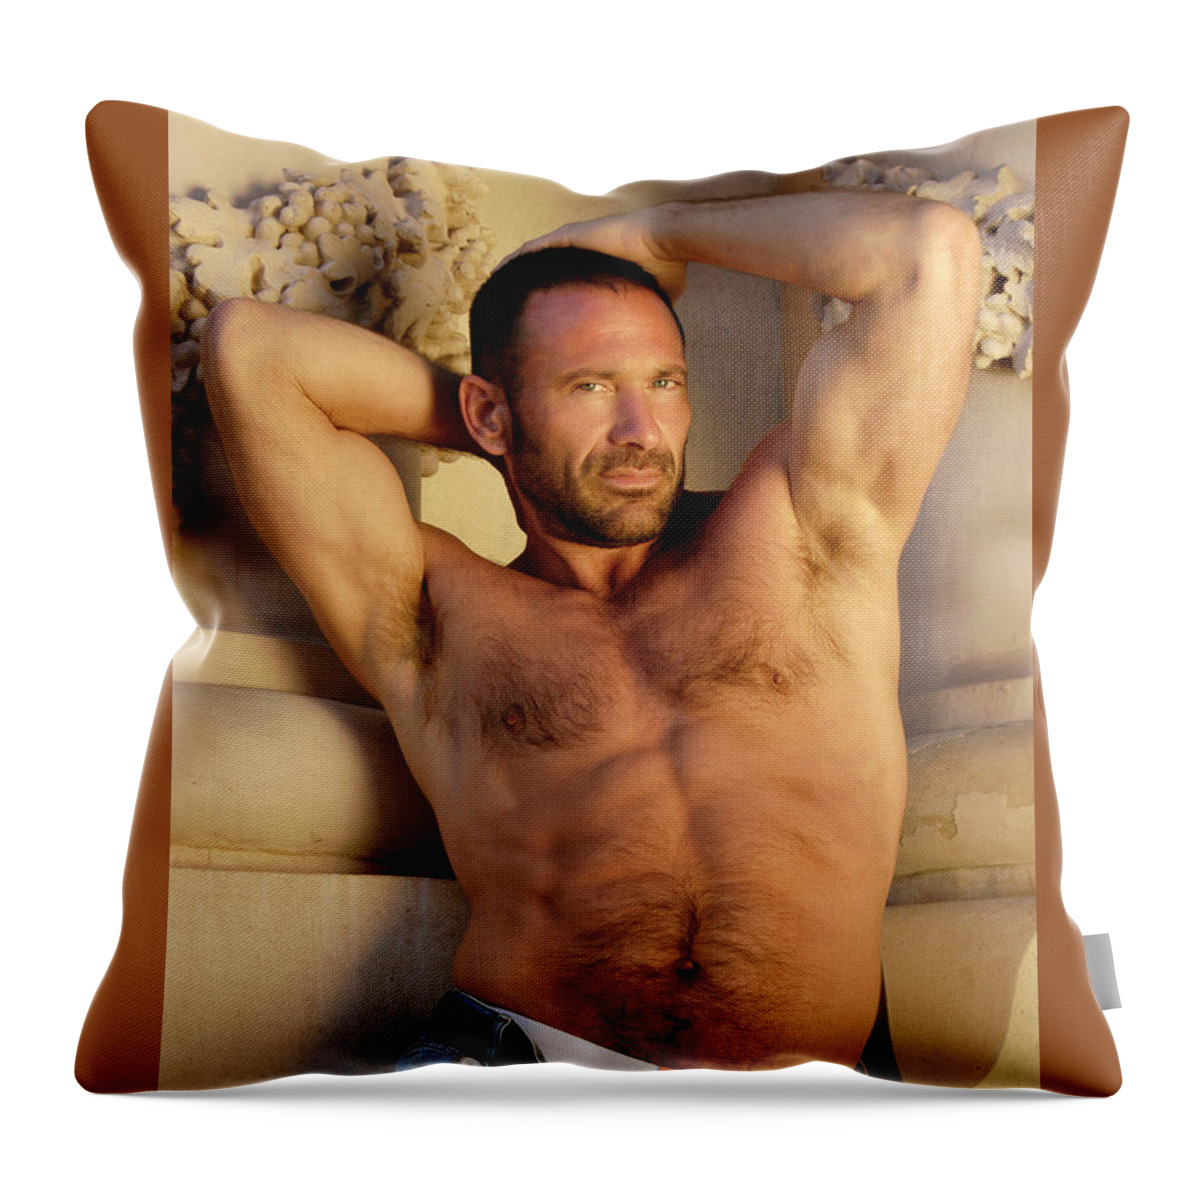 Homoerotic Art Throw Pillow featuring the photograph Sexy Shirtless Man Posing and showing off his hairy chest.  by Gunther Allen